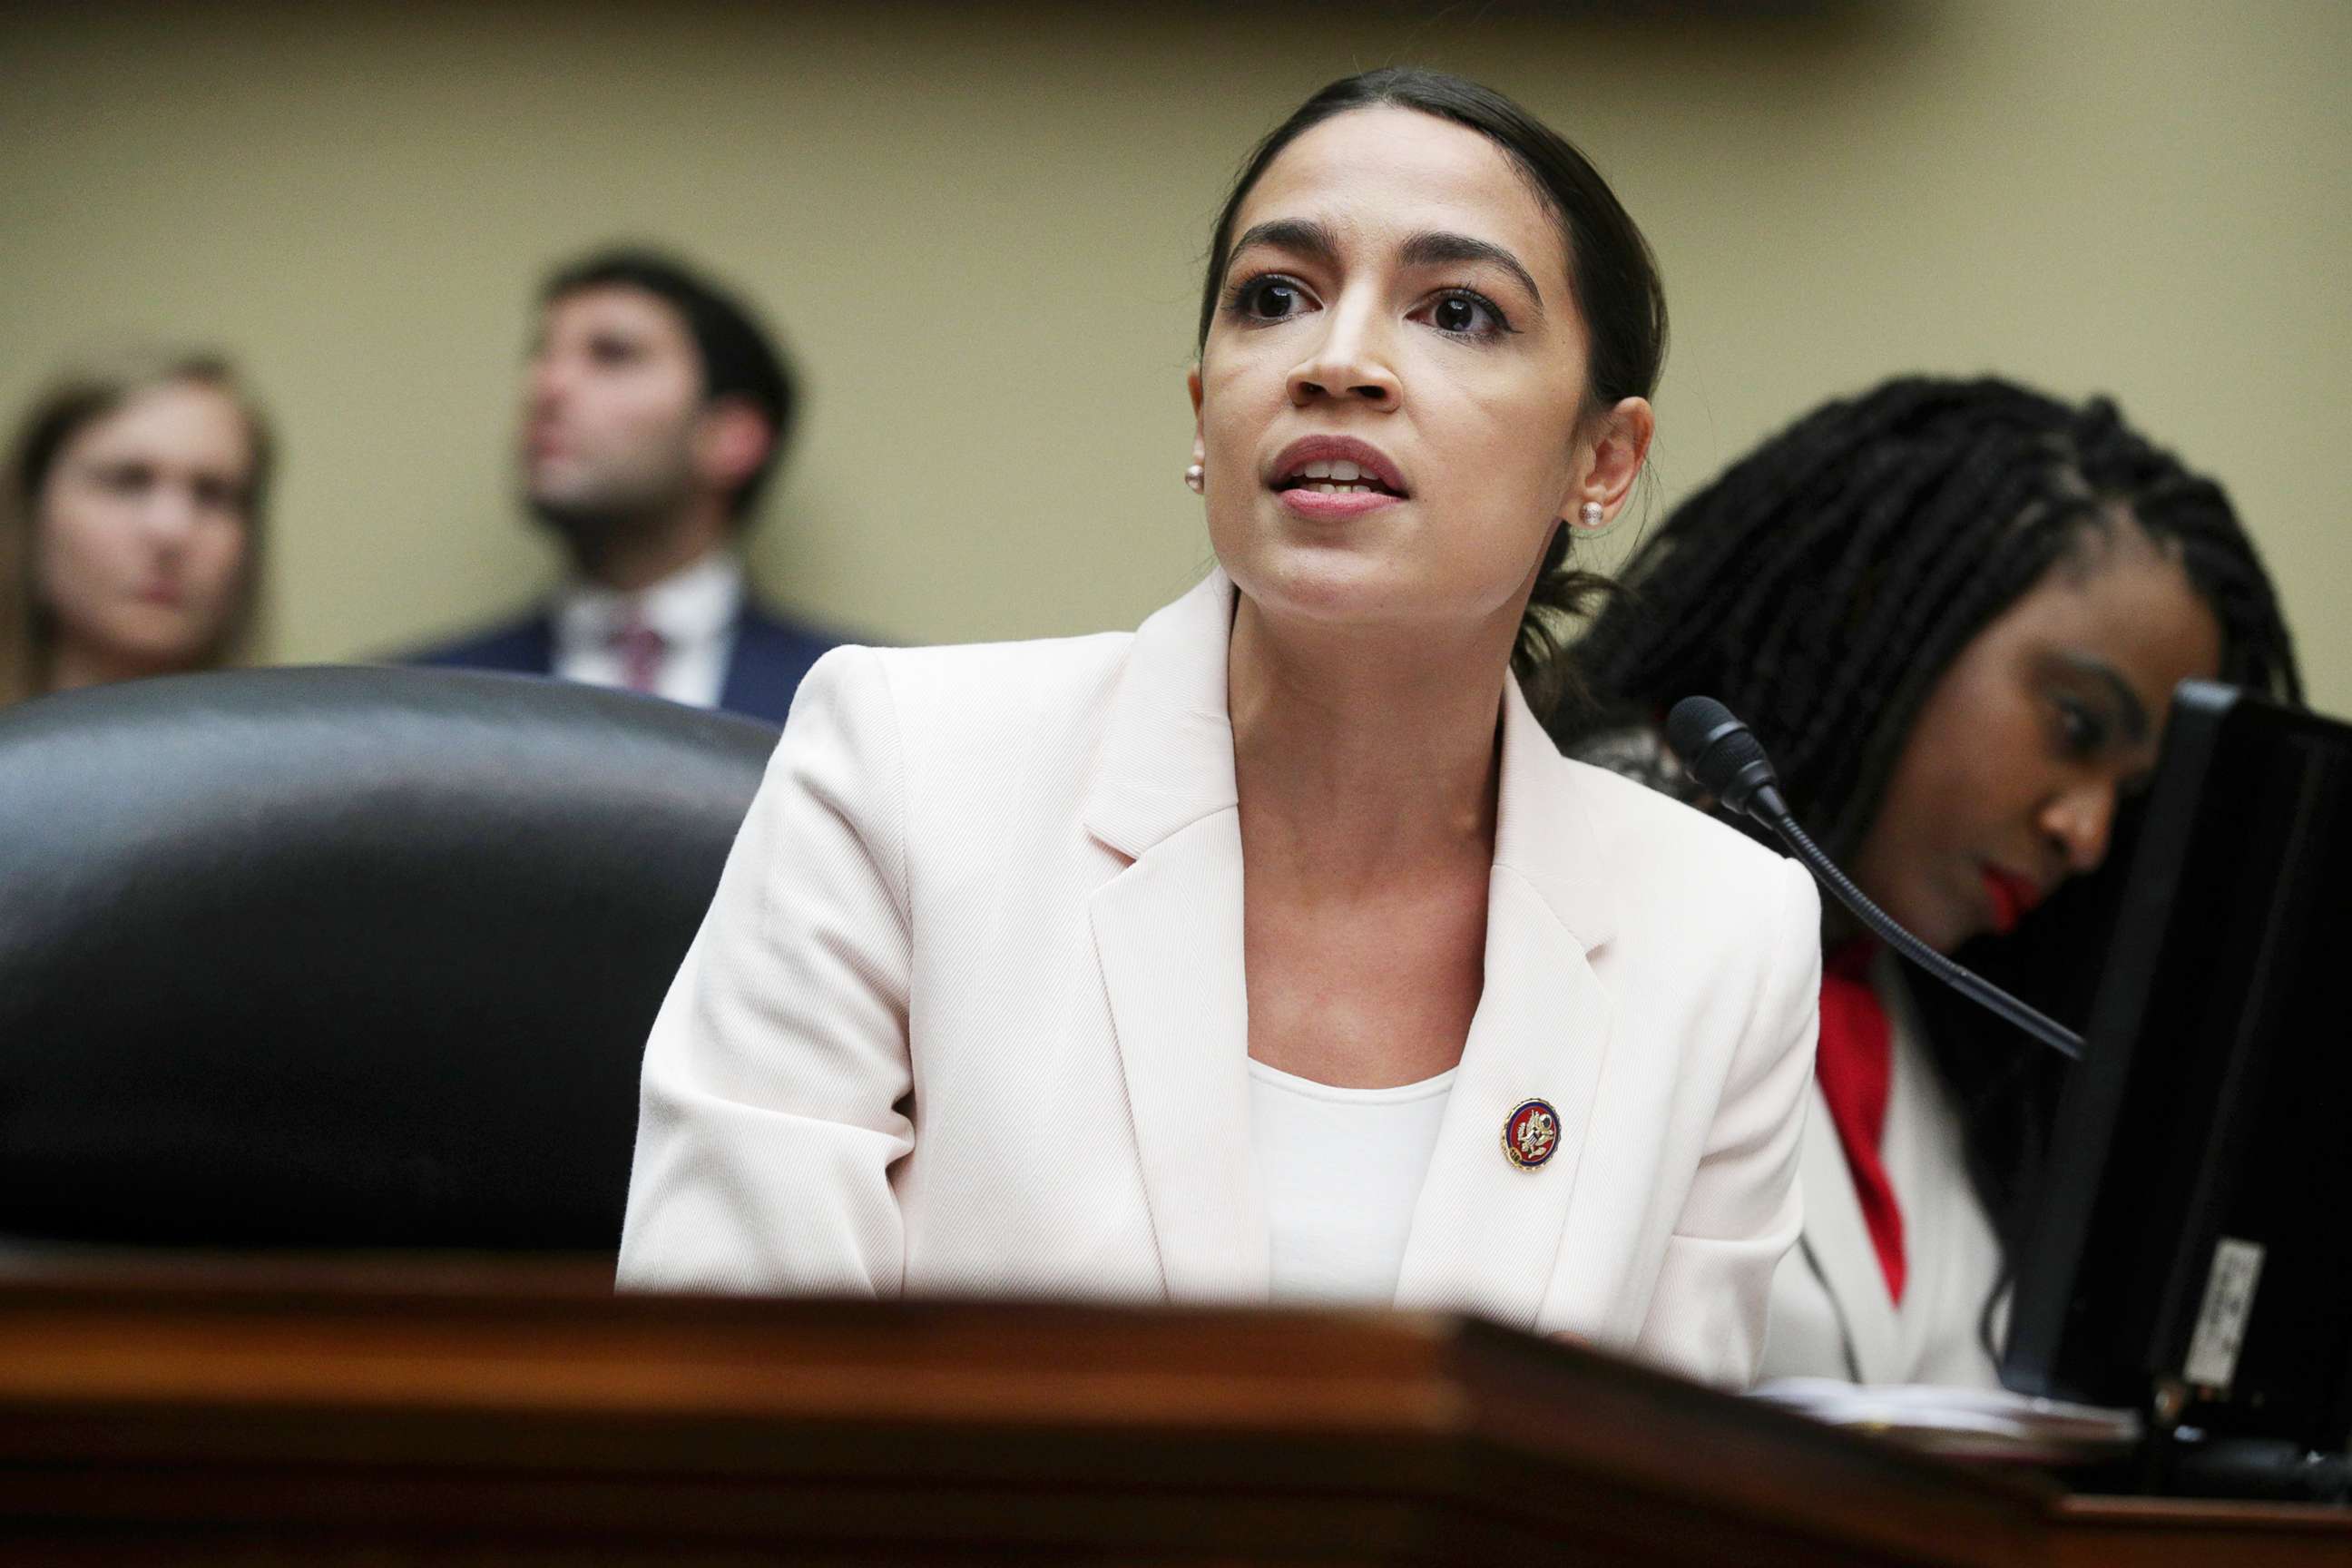 PHOTO: U.S. Rep. Alexandria Ocasio-Cortez speaks during a meeting of the House Committee on Oversight and Reform June 12, 2019, on Capitol Hill.